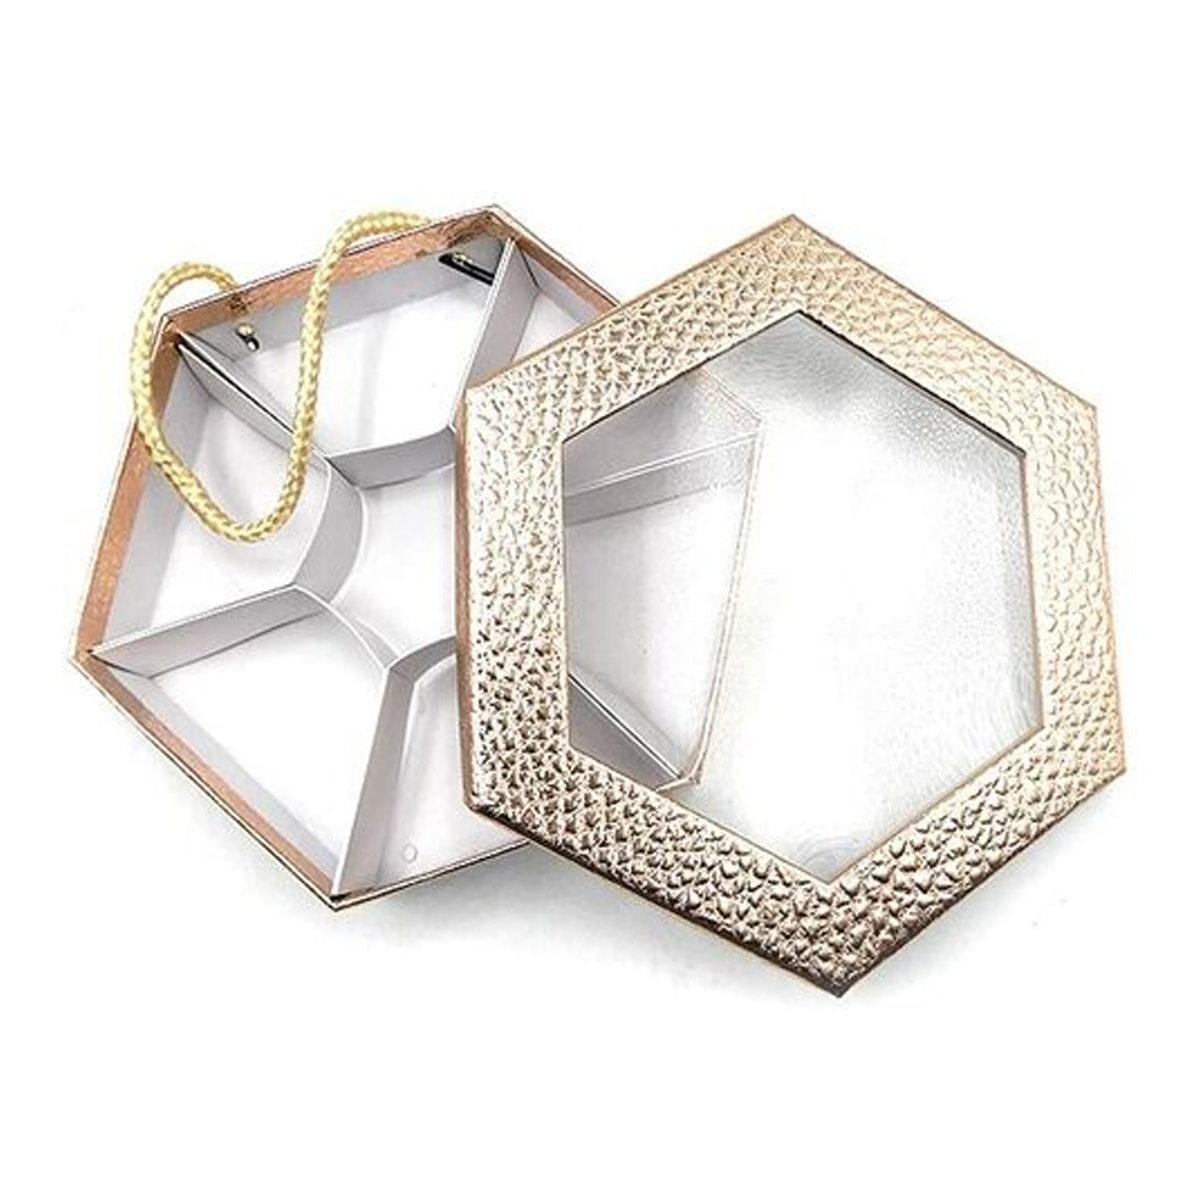 Hexagonal Chocolate / Nuts Box Silver Colour- (23X4.6cm) (Pack Of 6 Unit)